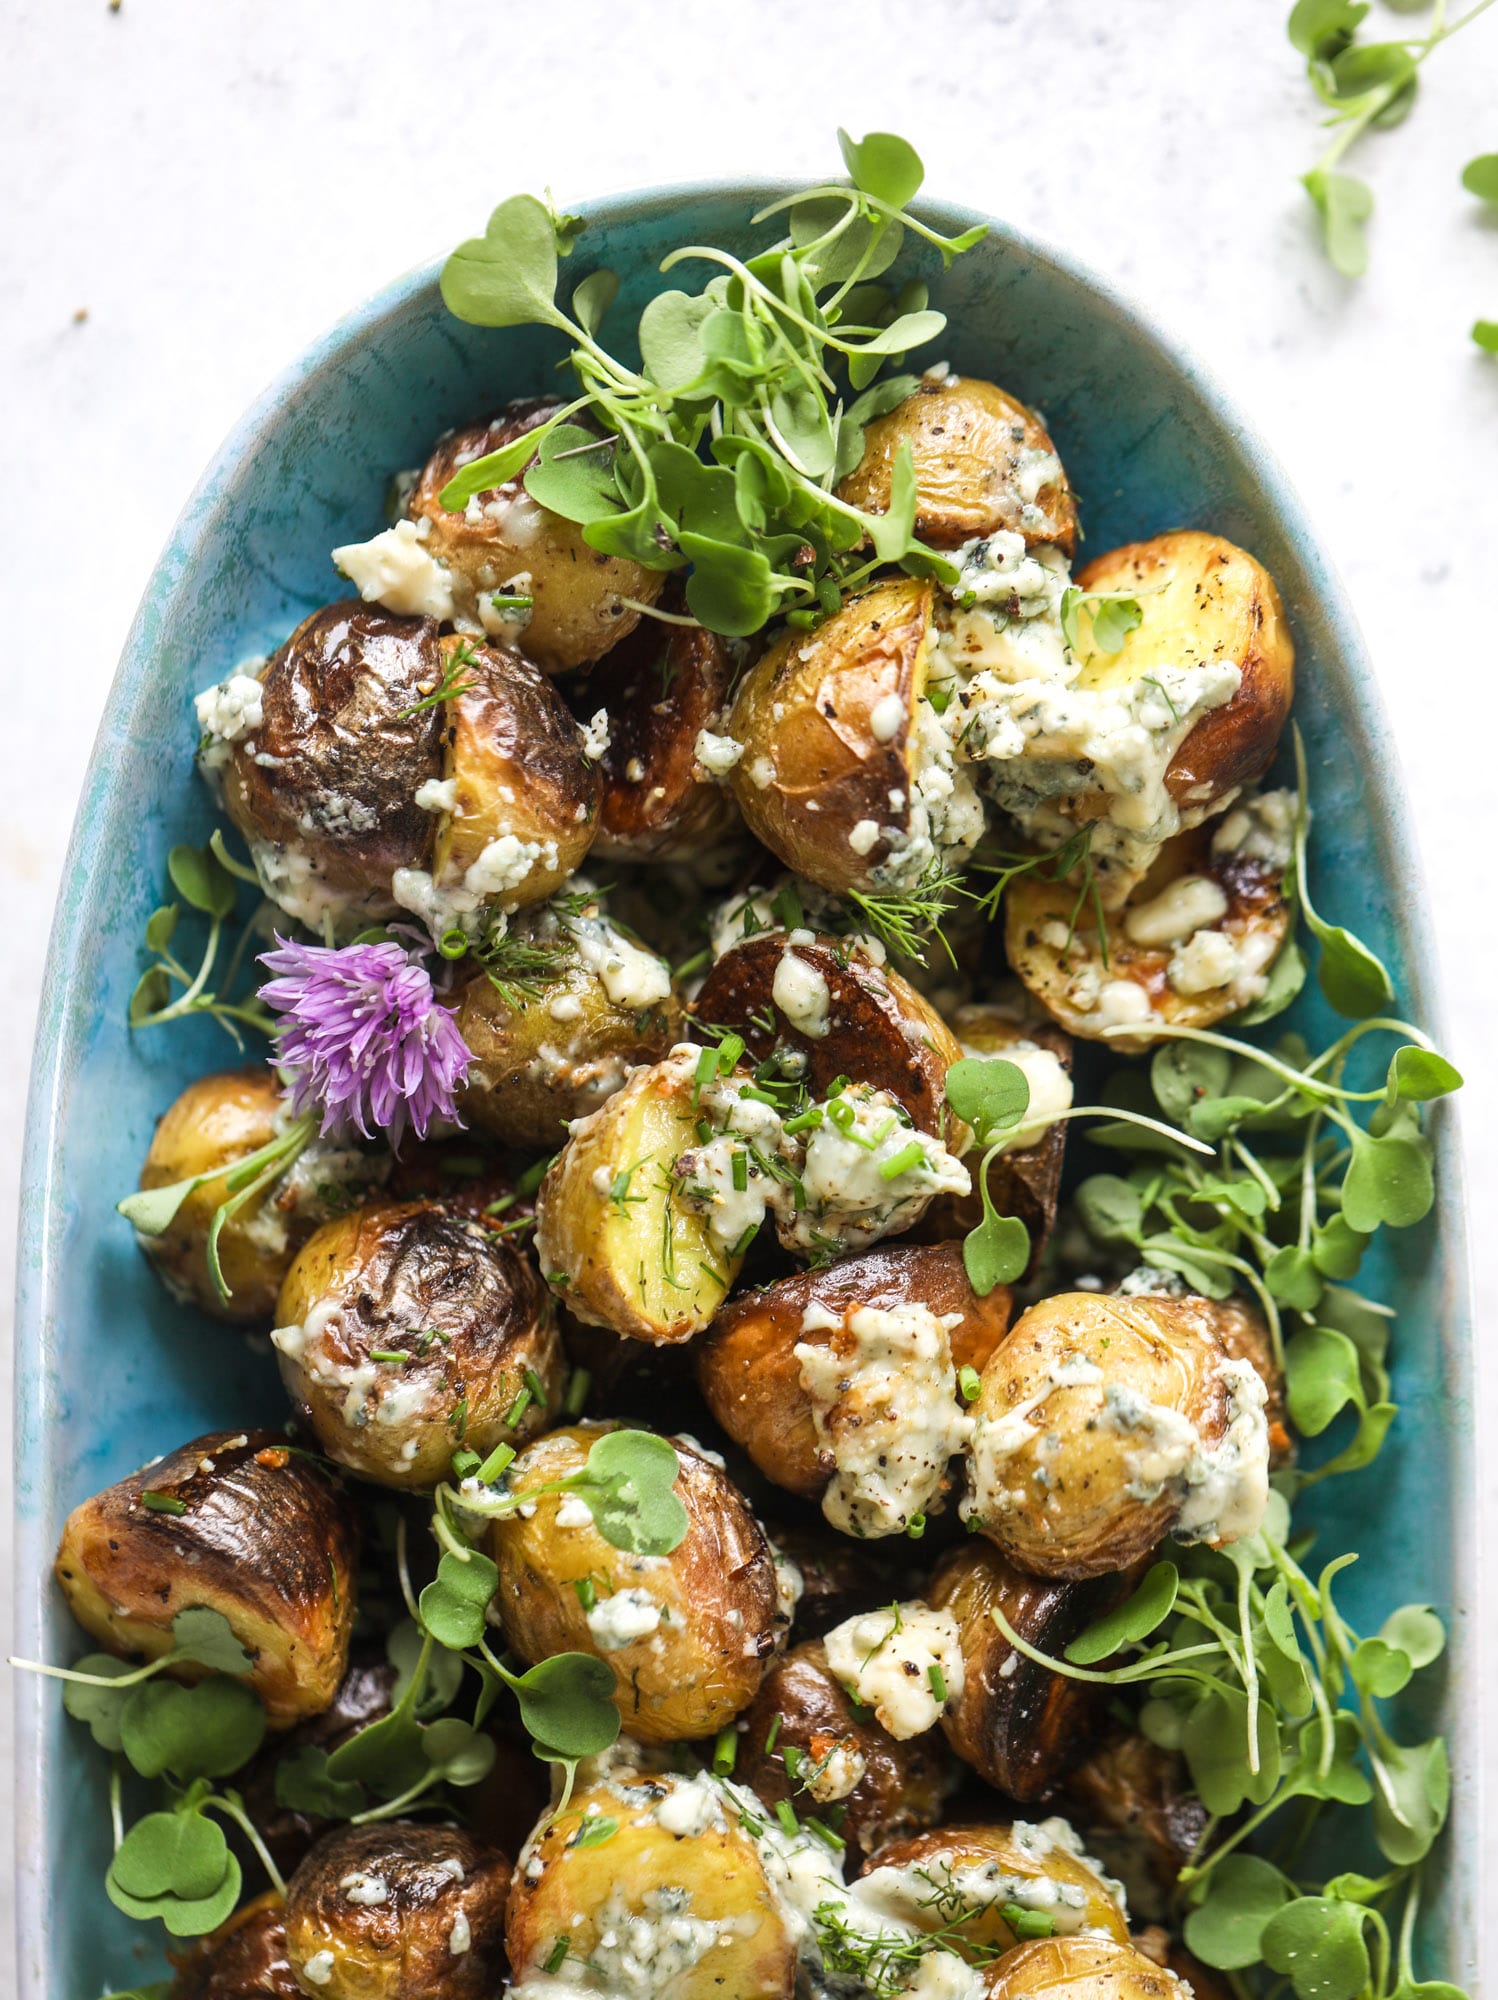 These grilled gorgonzola potatoes are loaded with flavor! Crispy, crunchy grilled bab golds topped with creamy blue cheese and fresh herbs.